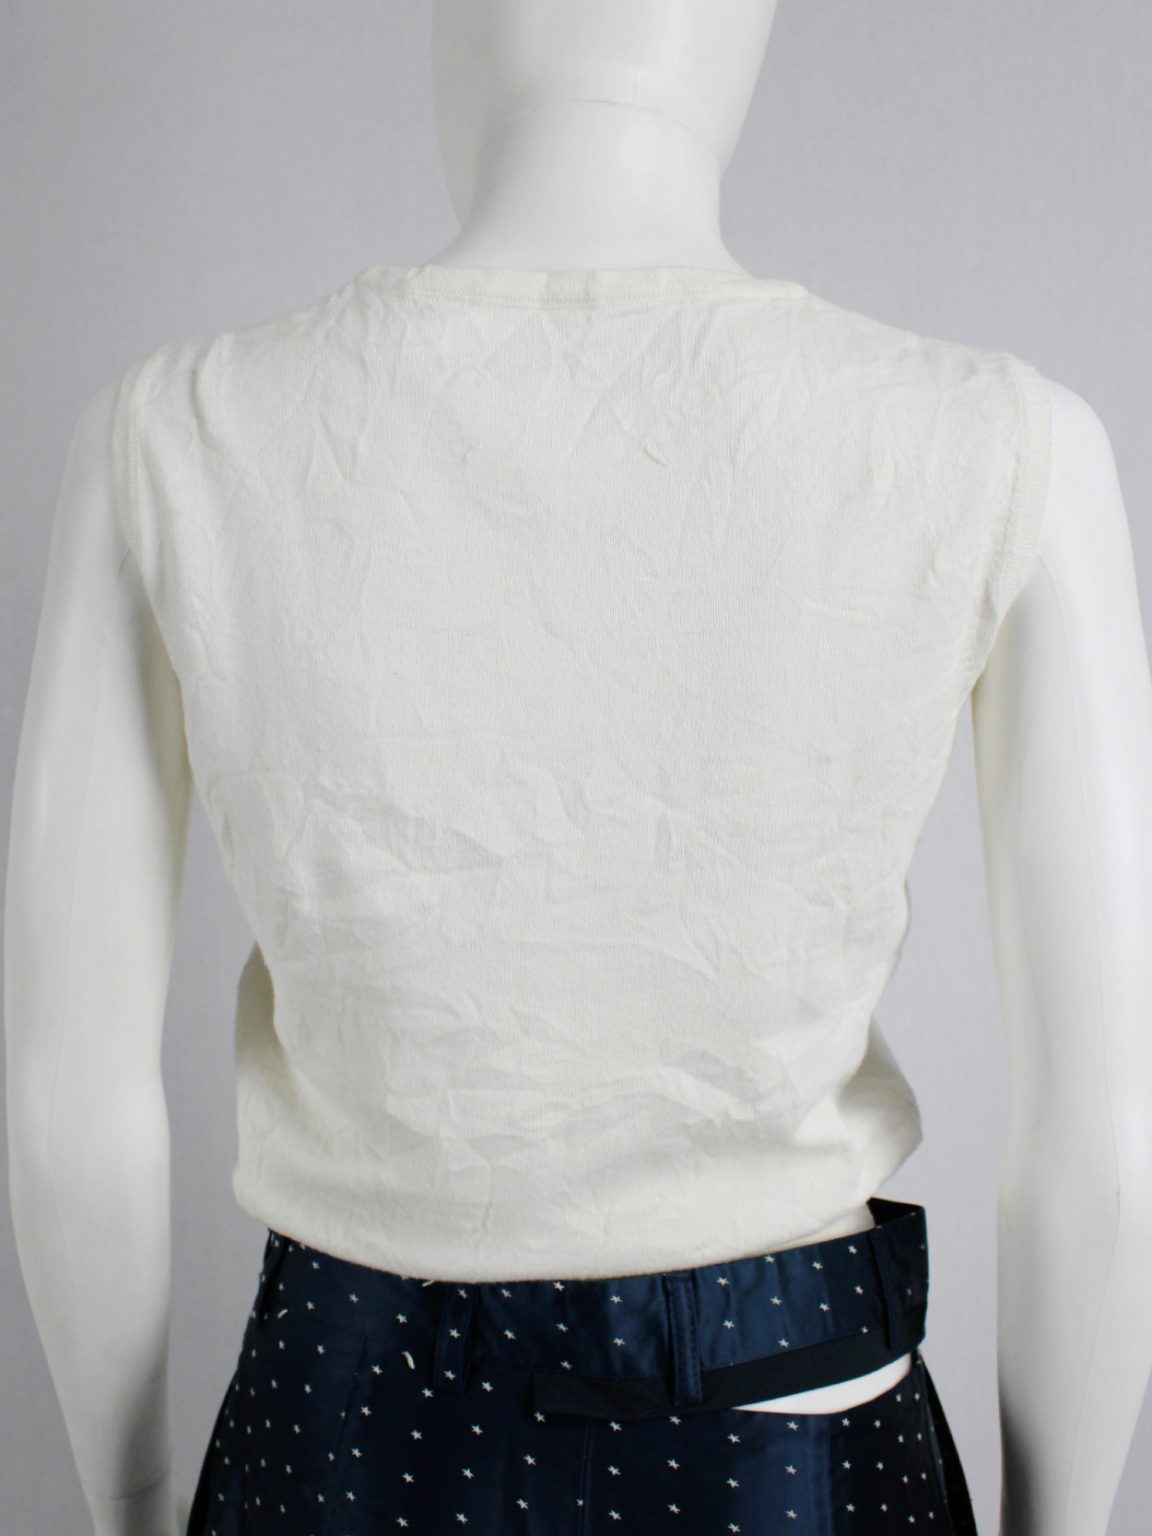 Maison Martin Margiela white top with permanent wrinkles — spring 1999